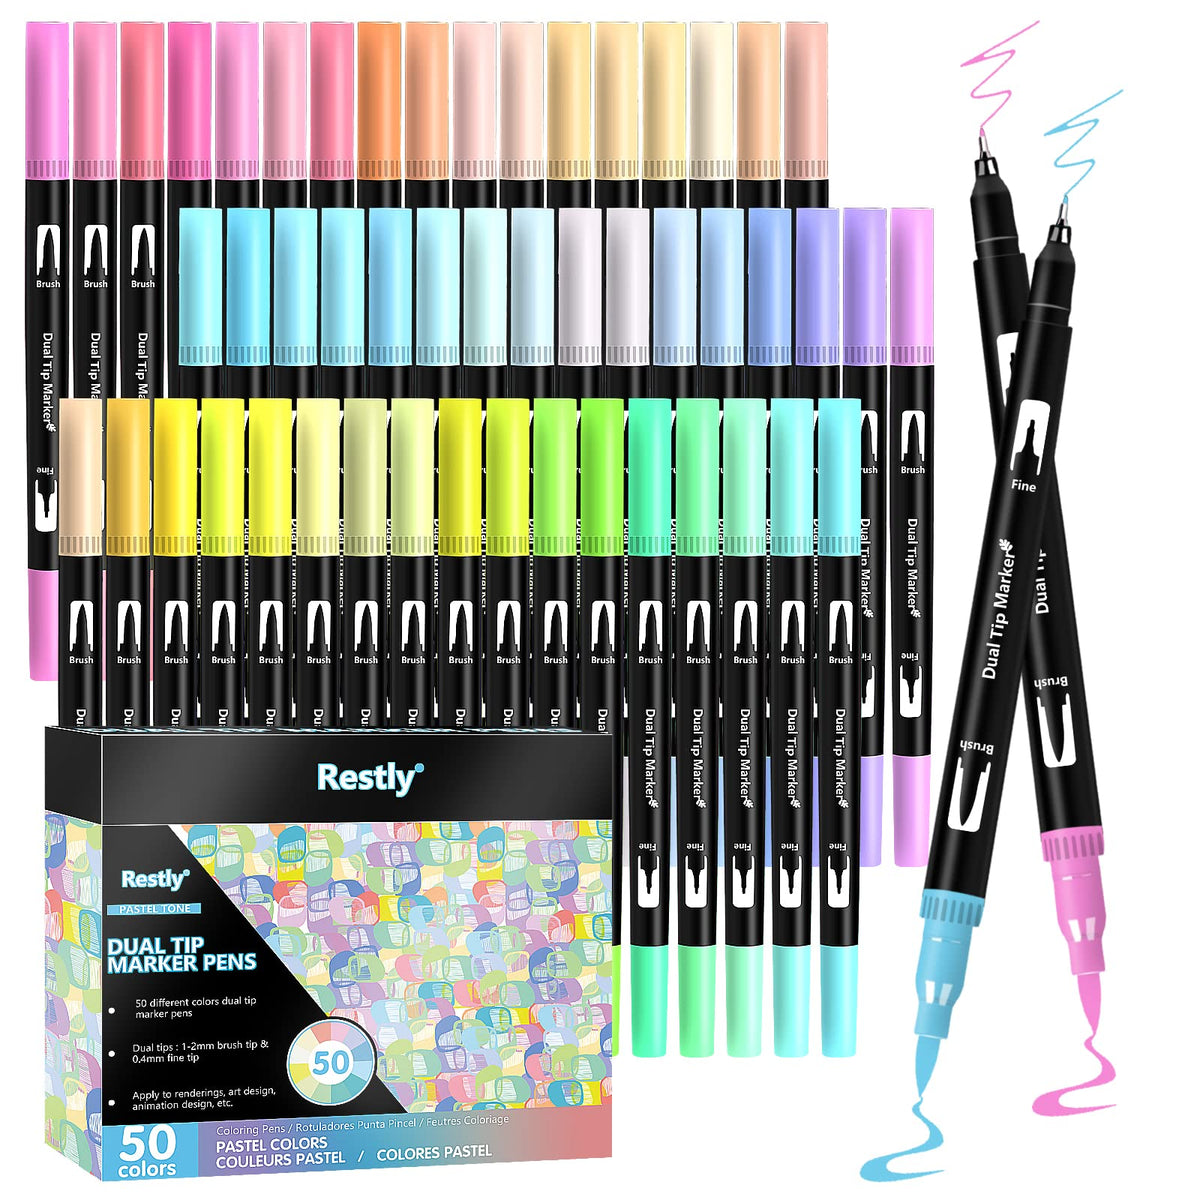 Eglyenlky Colored Markers for Adult Coloring Books Dual Tip Brush Pens with  100 Watercolor Fine Tip Markers (0.4mm) and Brush pens (1-2mm) for Kids